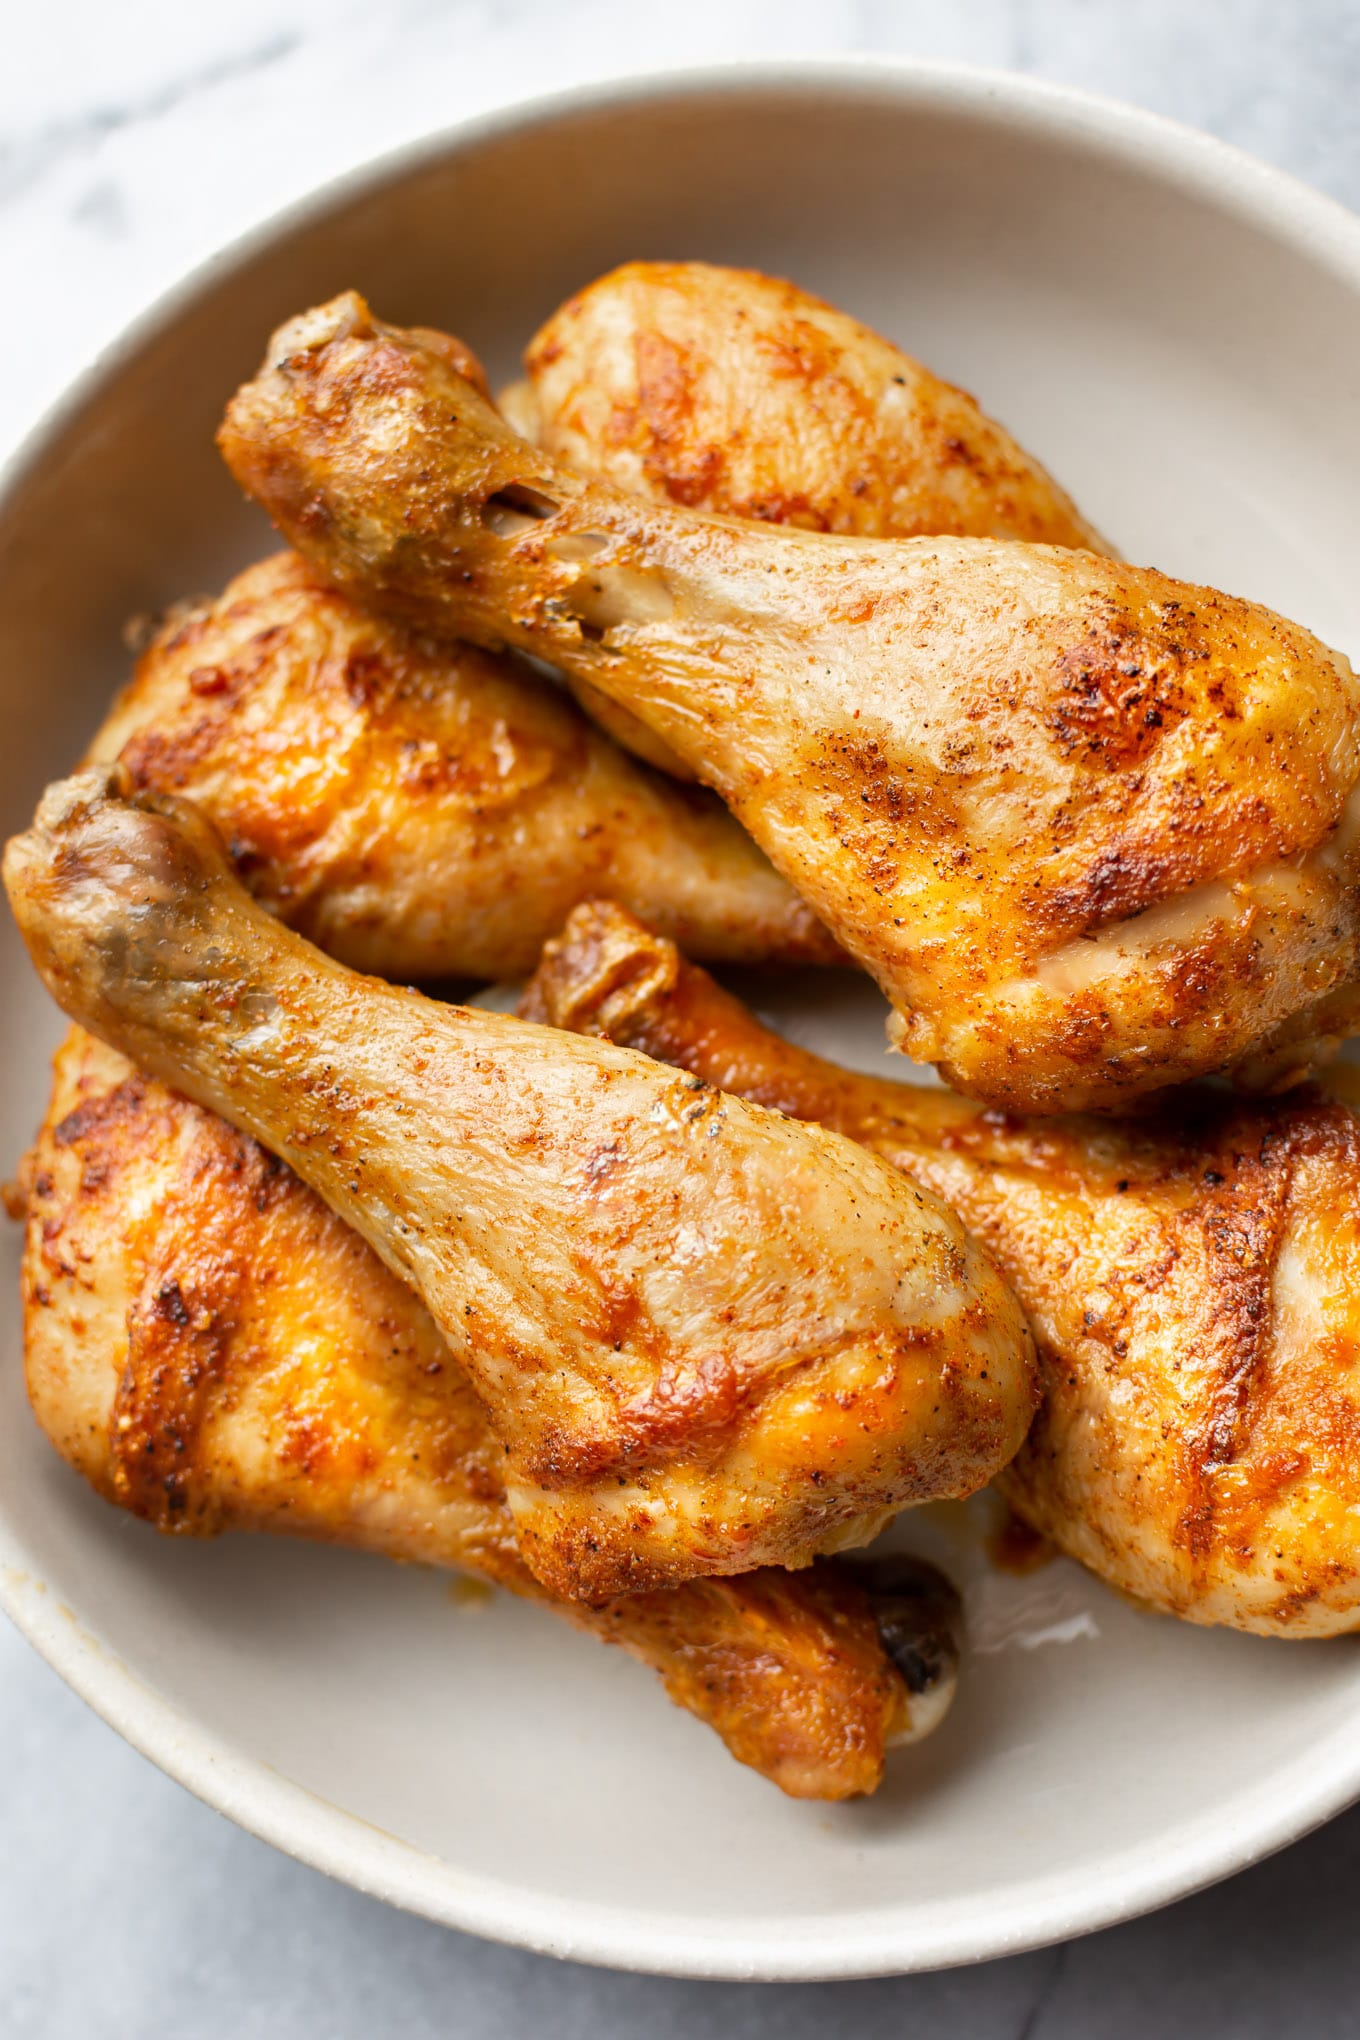 baked chicken thigh recipes with baking powder